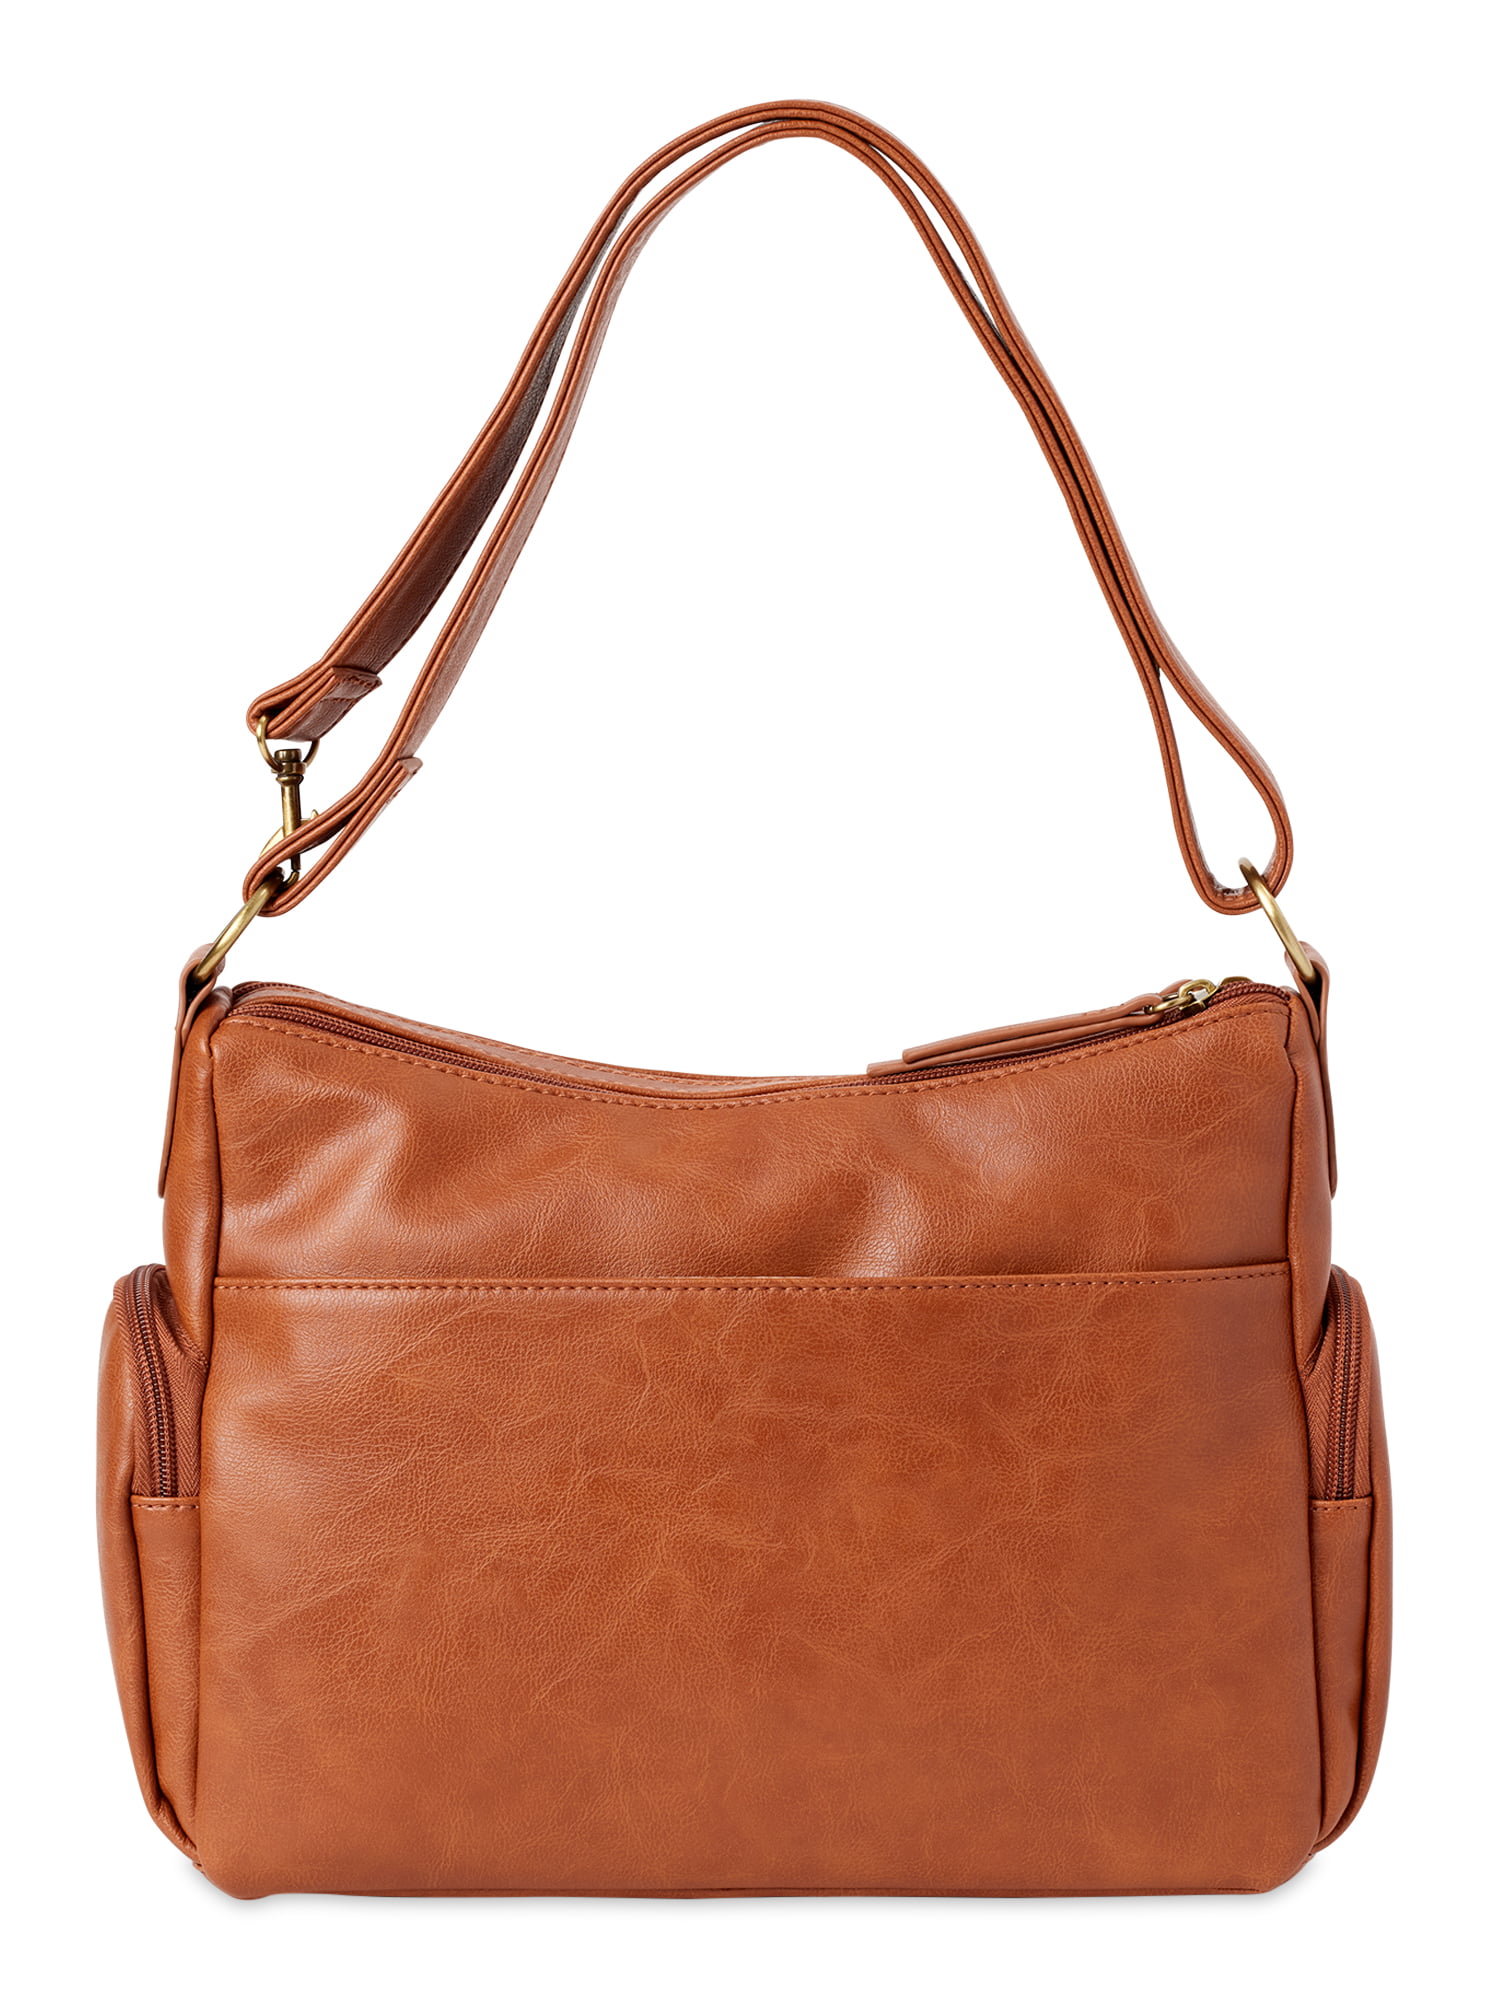 Bueno Collection Cognac Tan Brown Faux Leather Crossbody Hobo